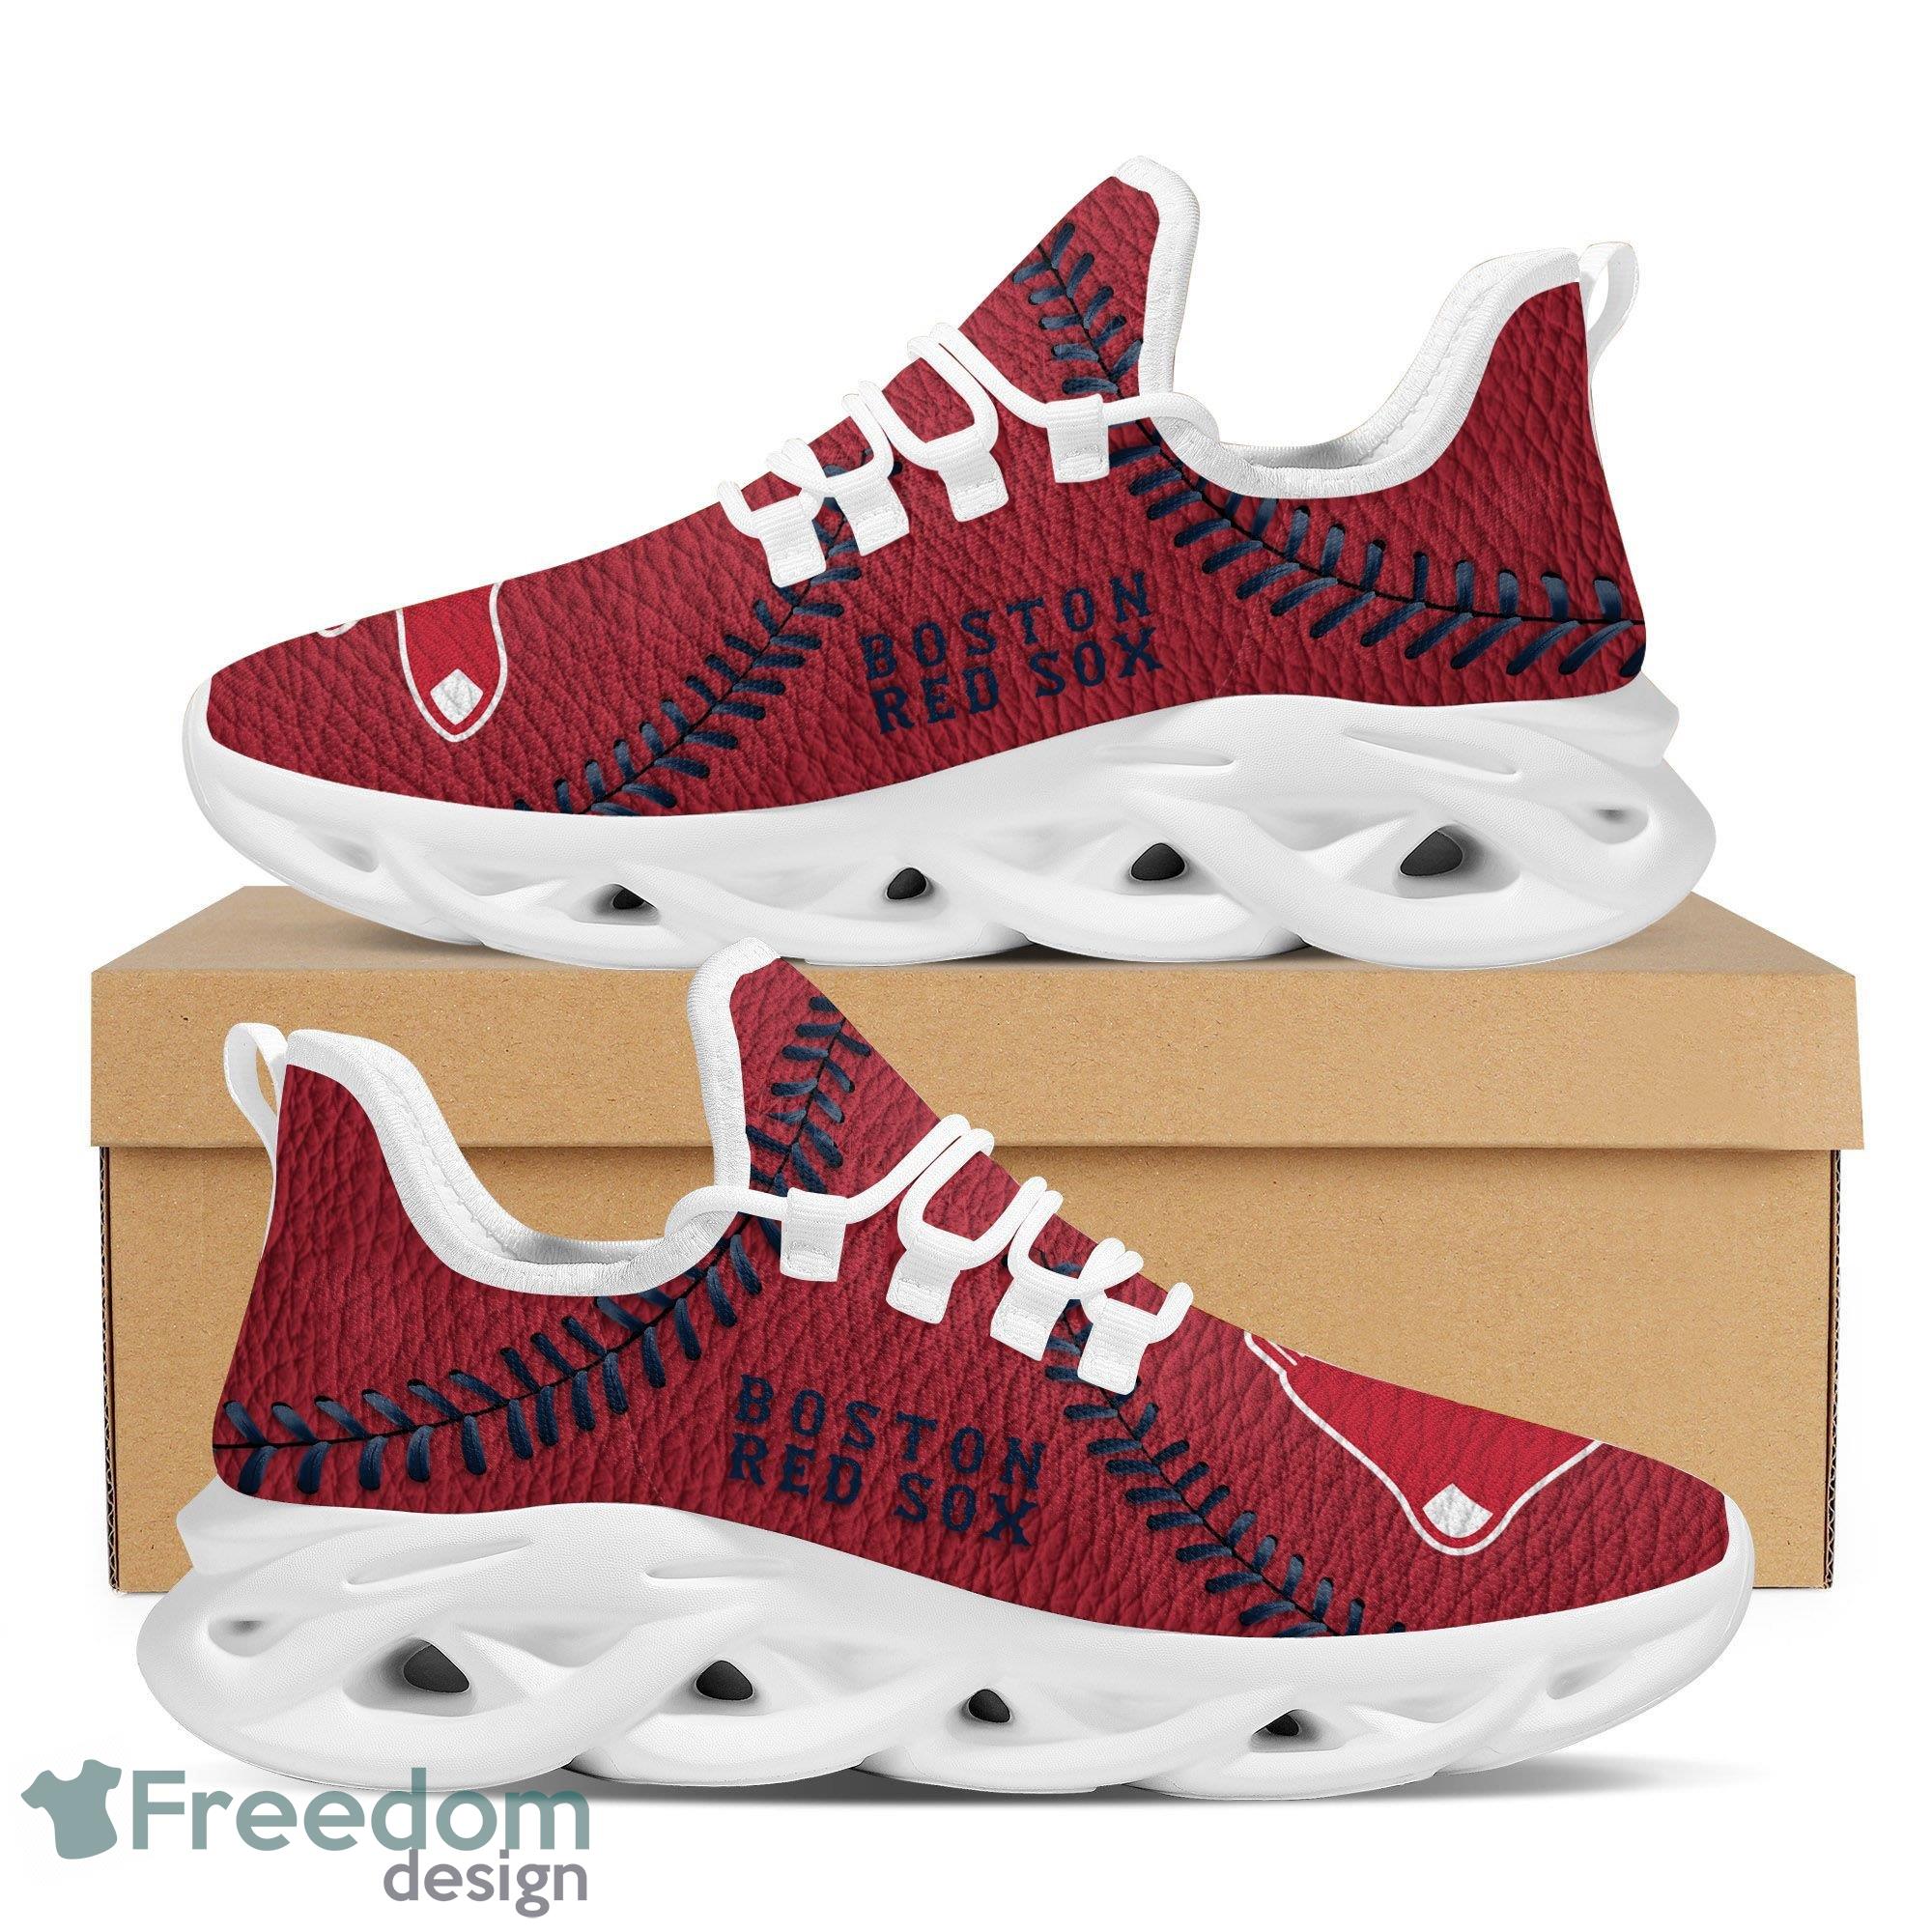 Boston Red Sox Casual Max Soul Shoes For Men And Women